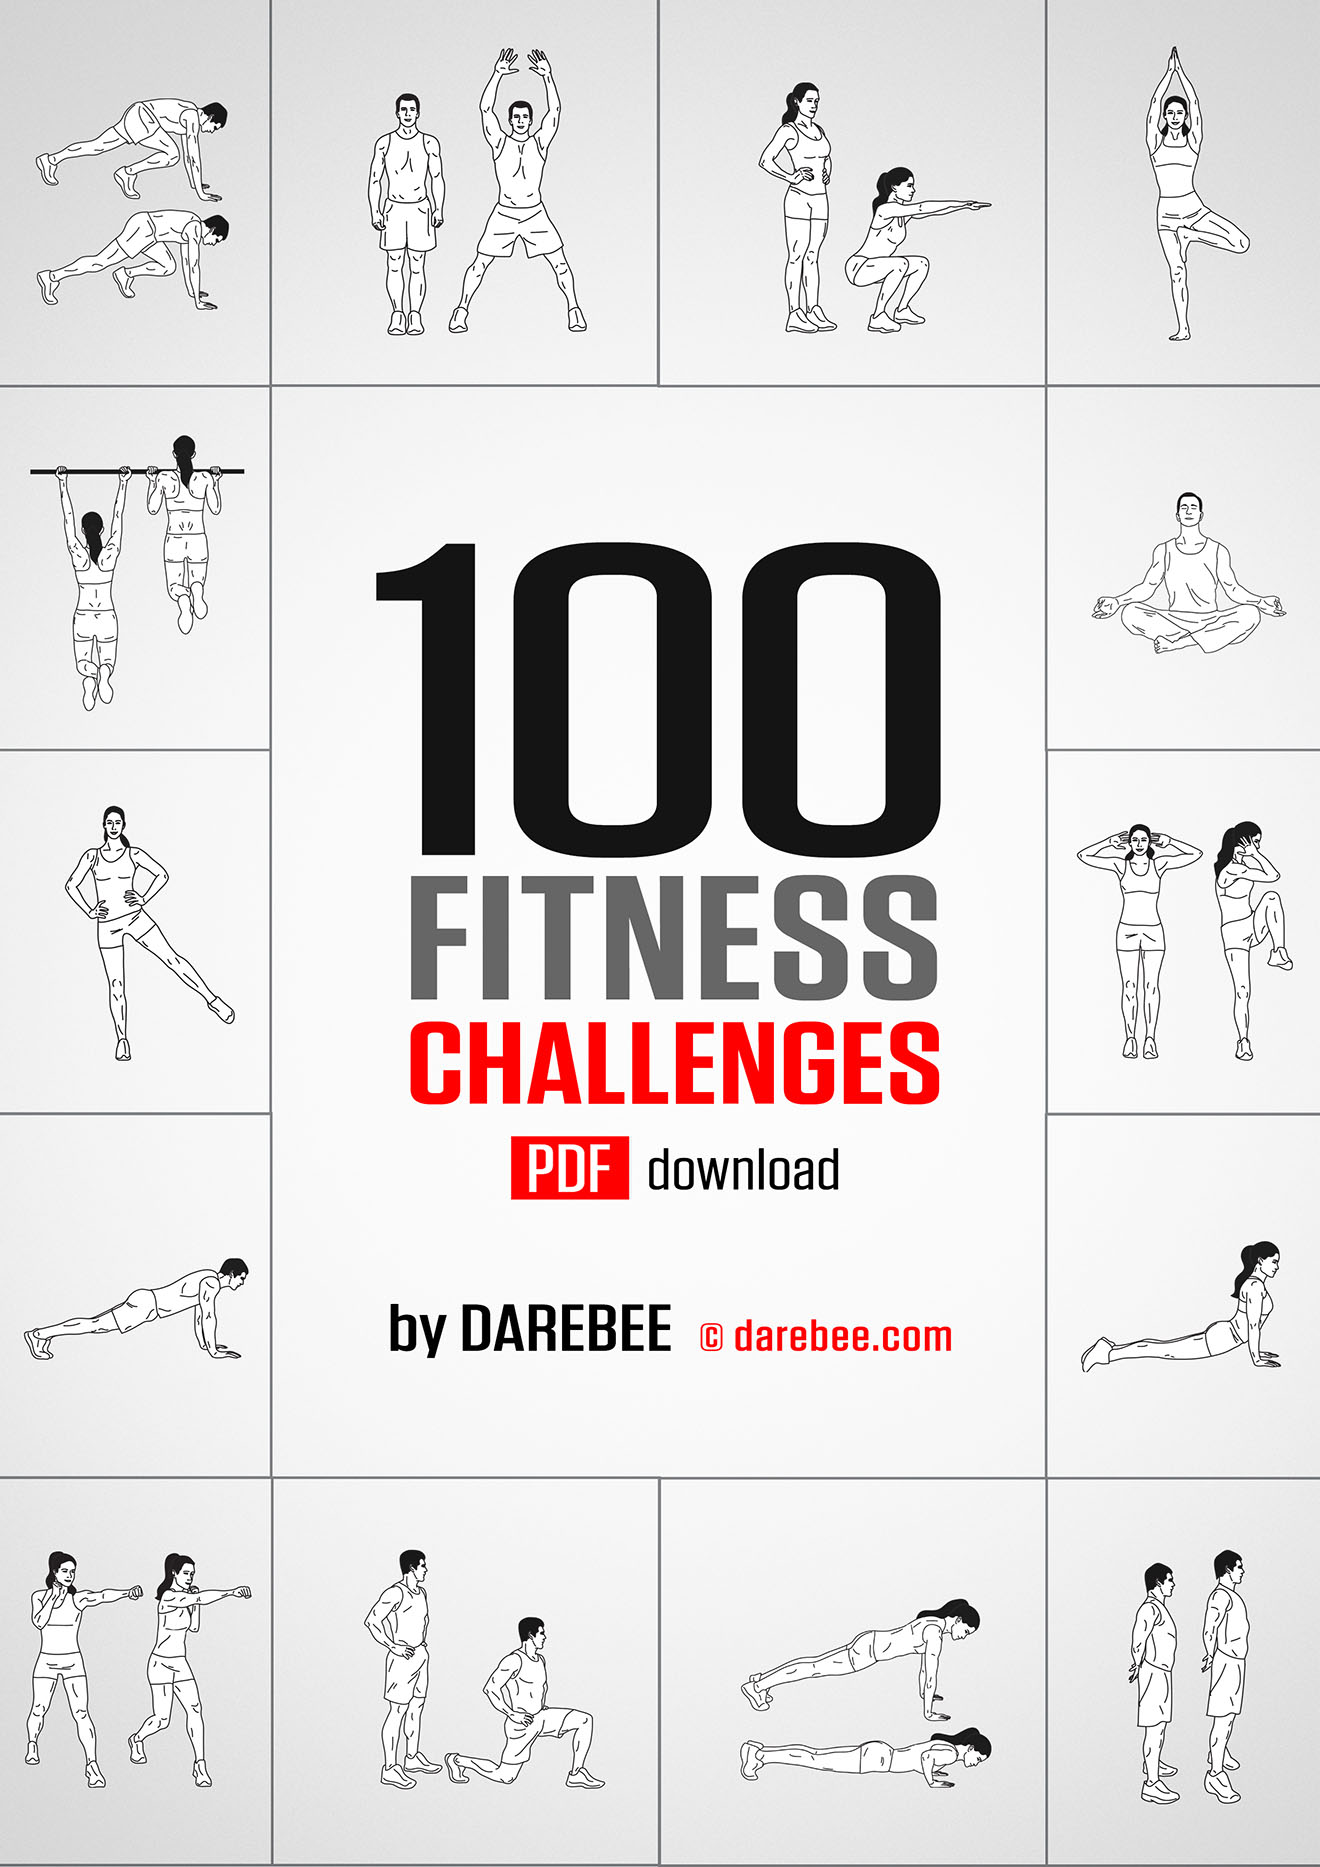 100 Fitness Challenges: Month-long Darebee Fitness Challenges to Make Your Body Healthier and Your Brain Sharper is a DAREBEE fitness book collecting 100 fitness challenges you can do to stay mentally sharper and physically healthier.